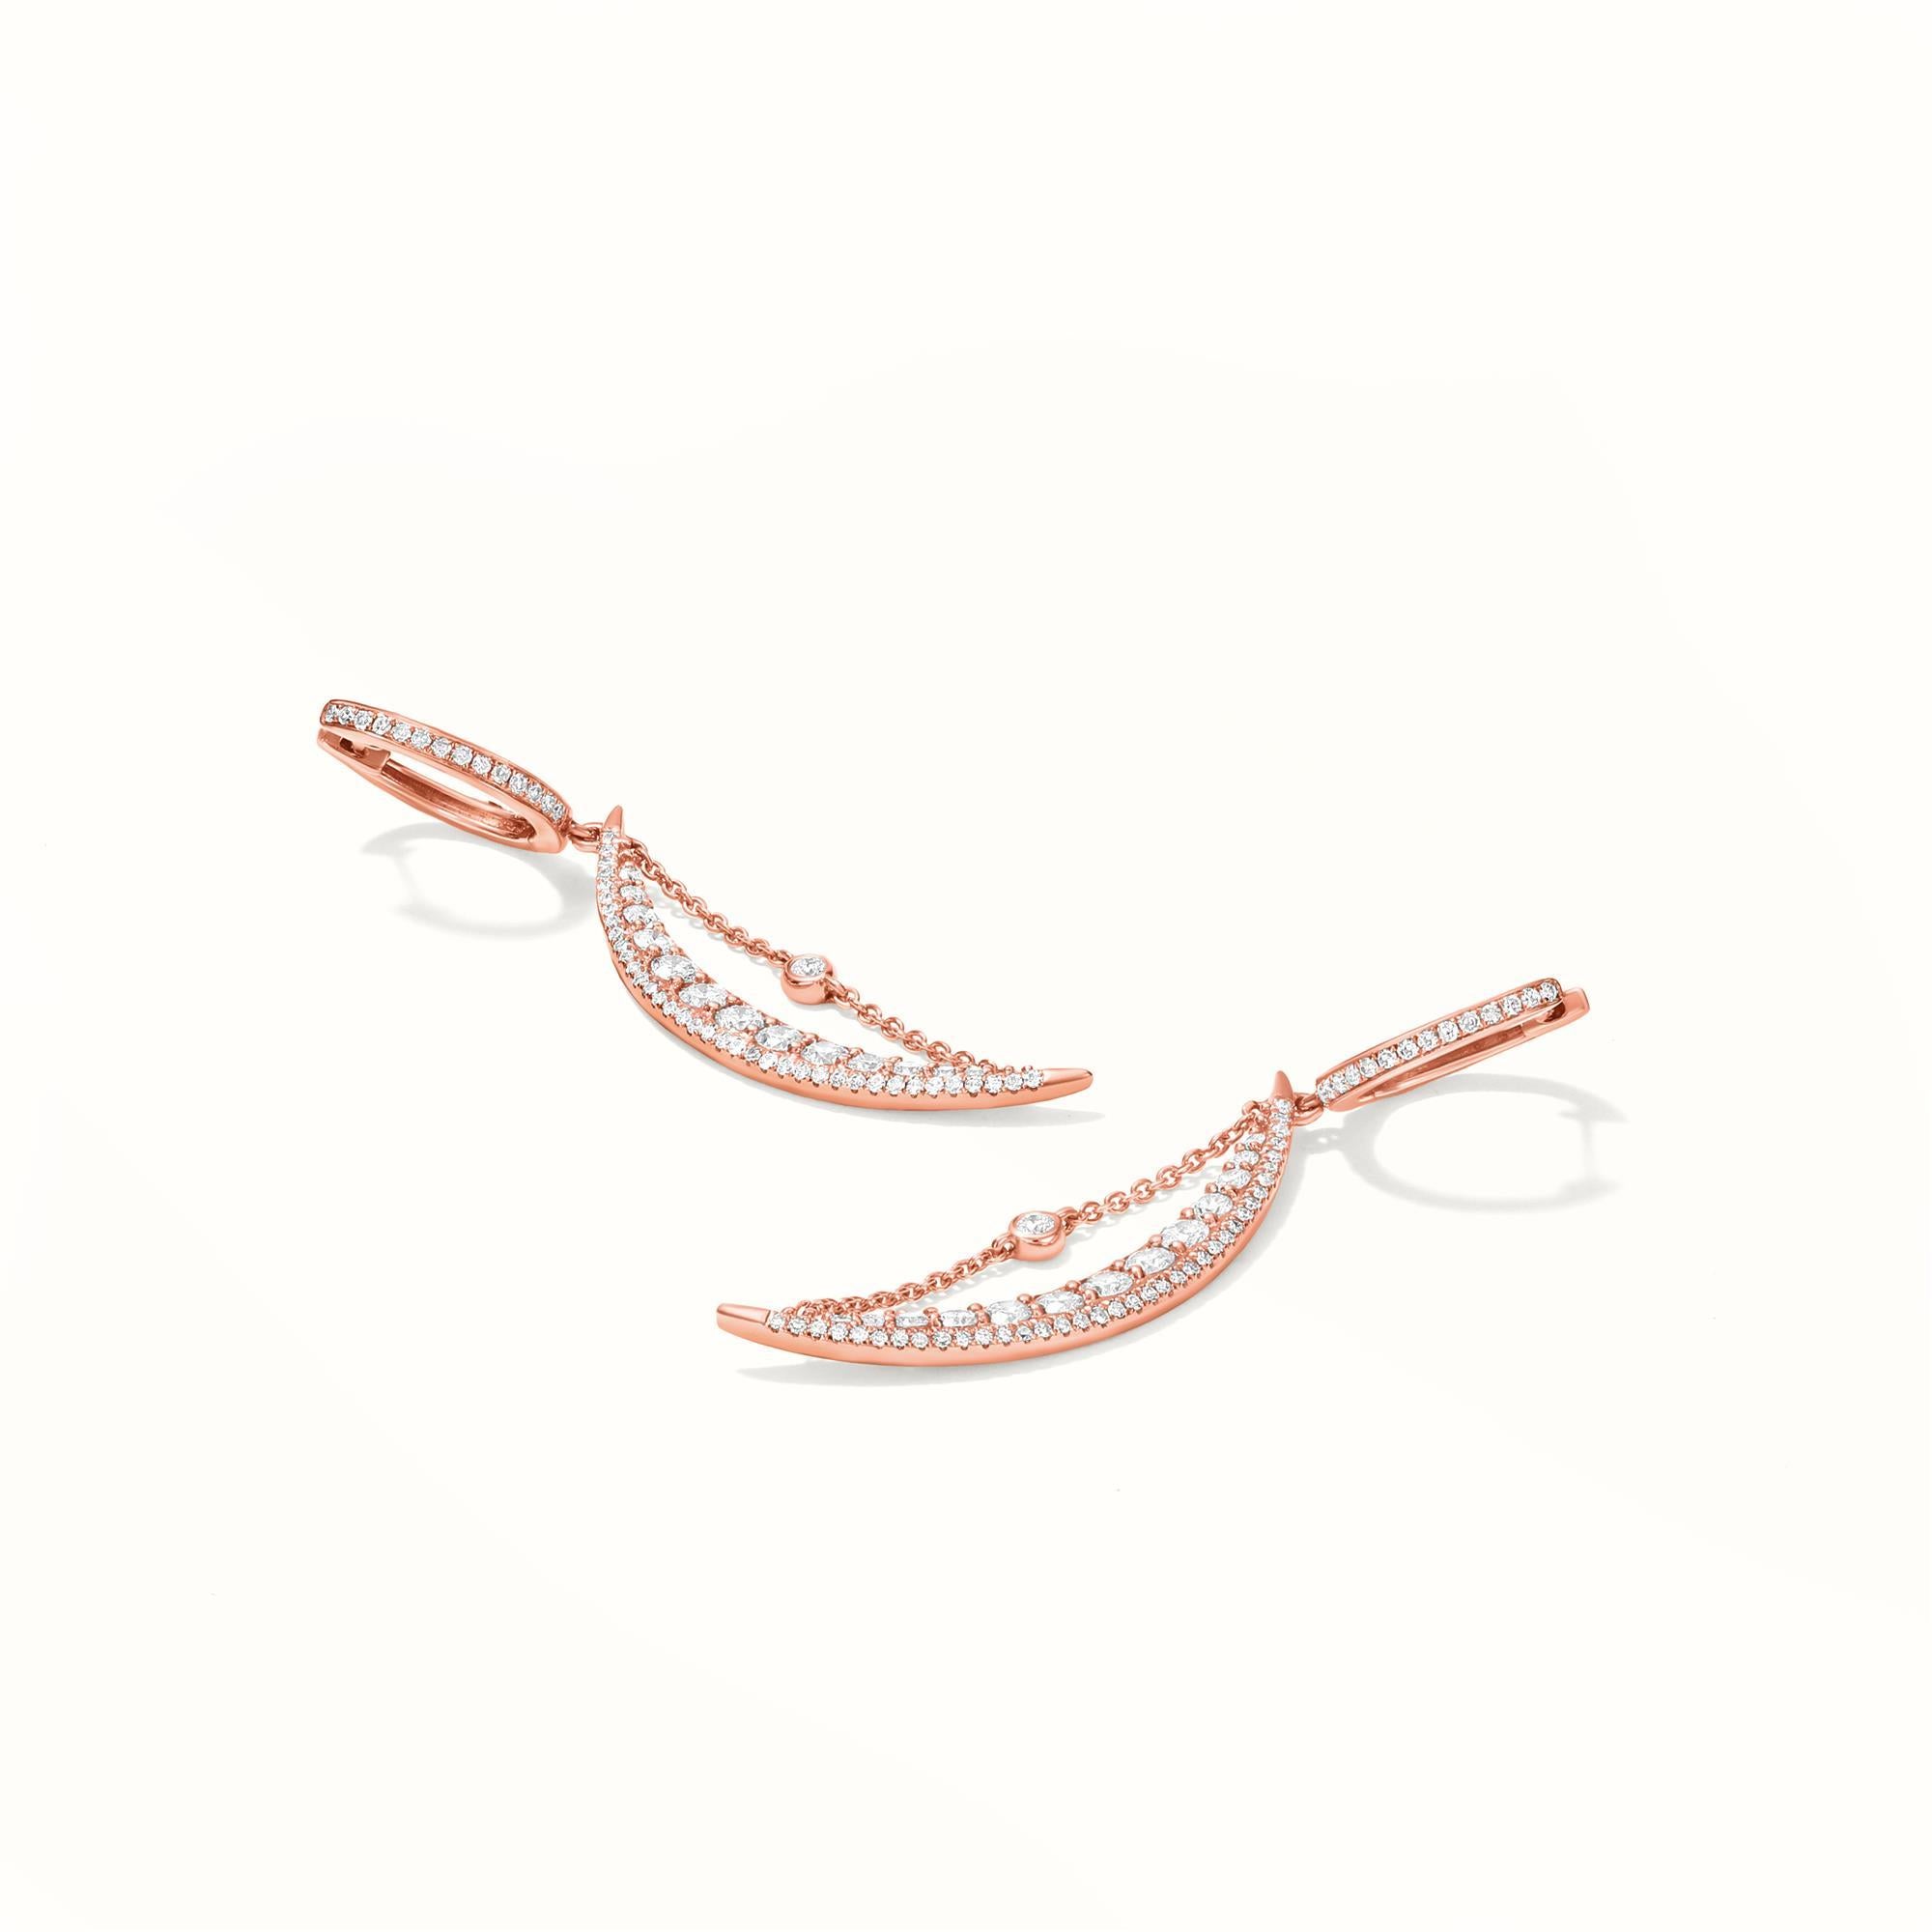 Luxle 1.13 Ct. T.W. Round Diamond Crescent Moon Drop Earrings in 14k Rose Gold In New Condition For Sale In New York, NY